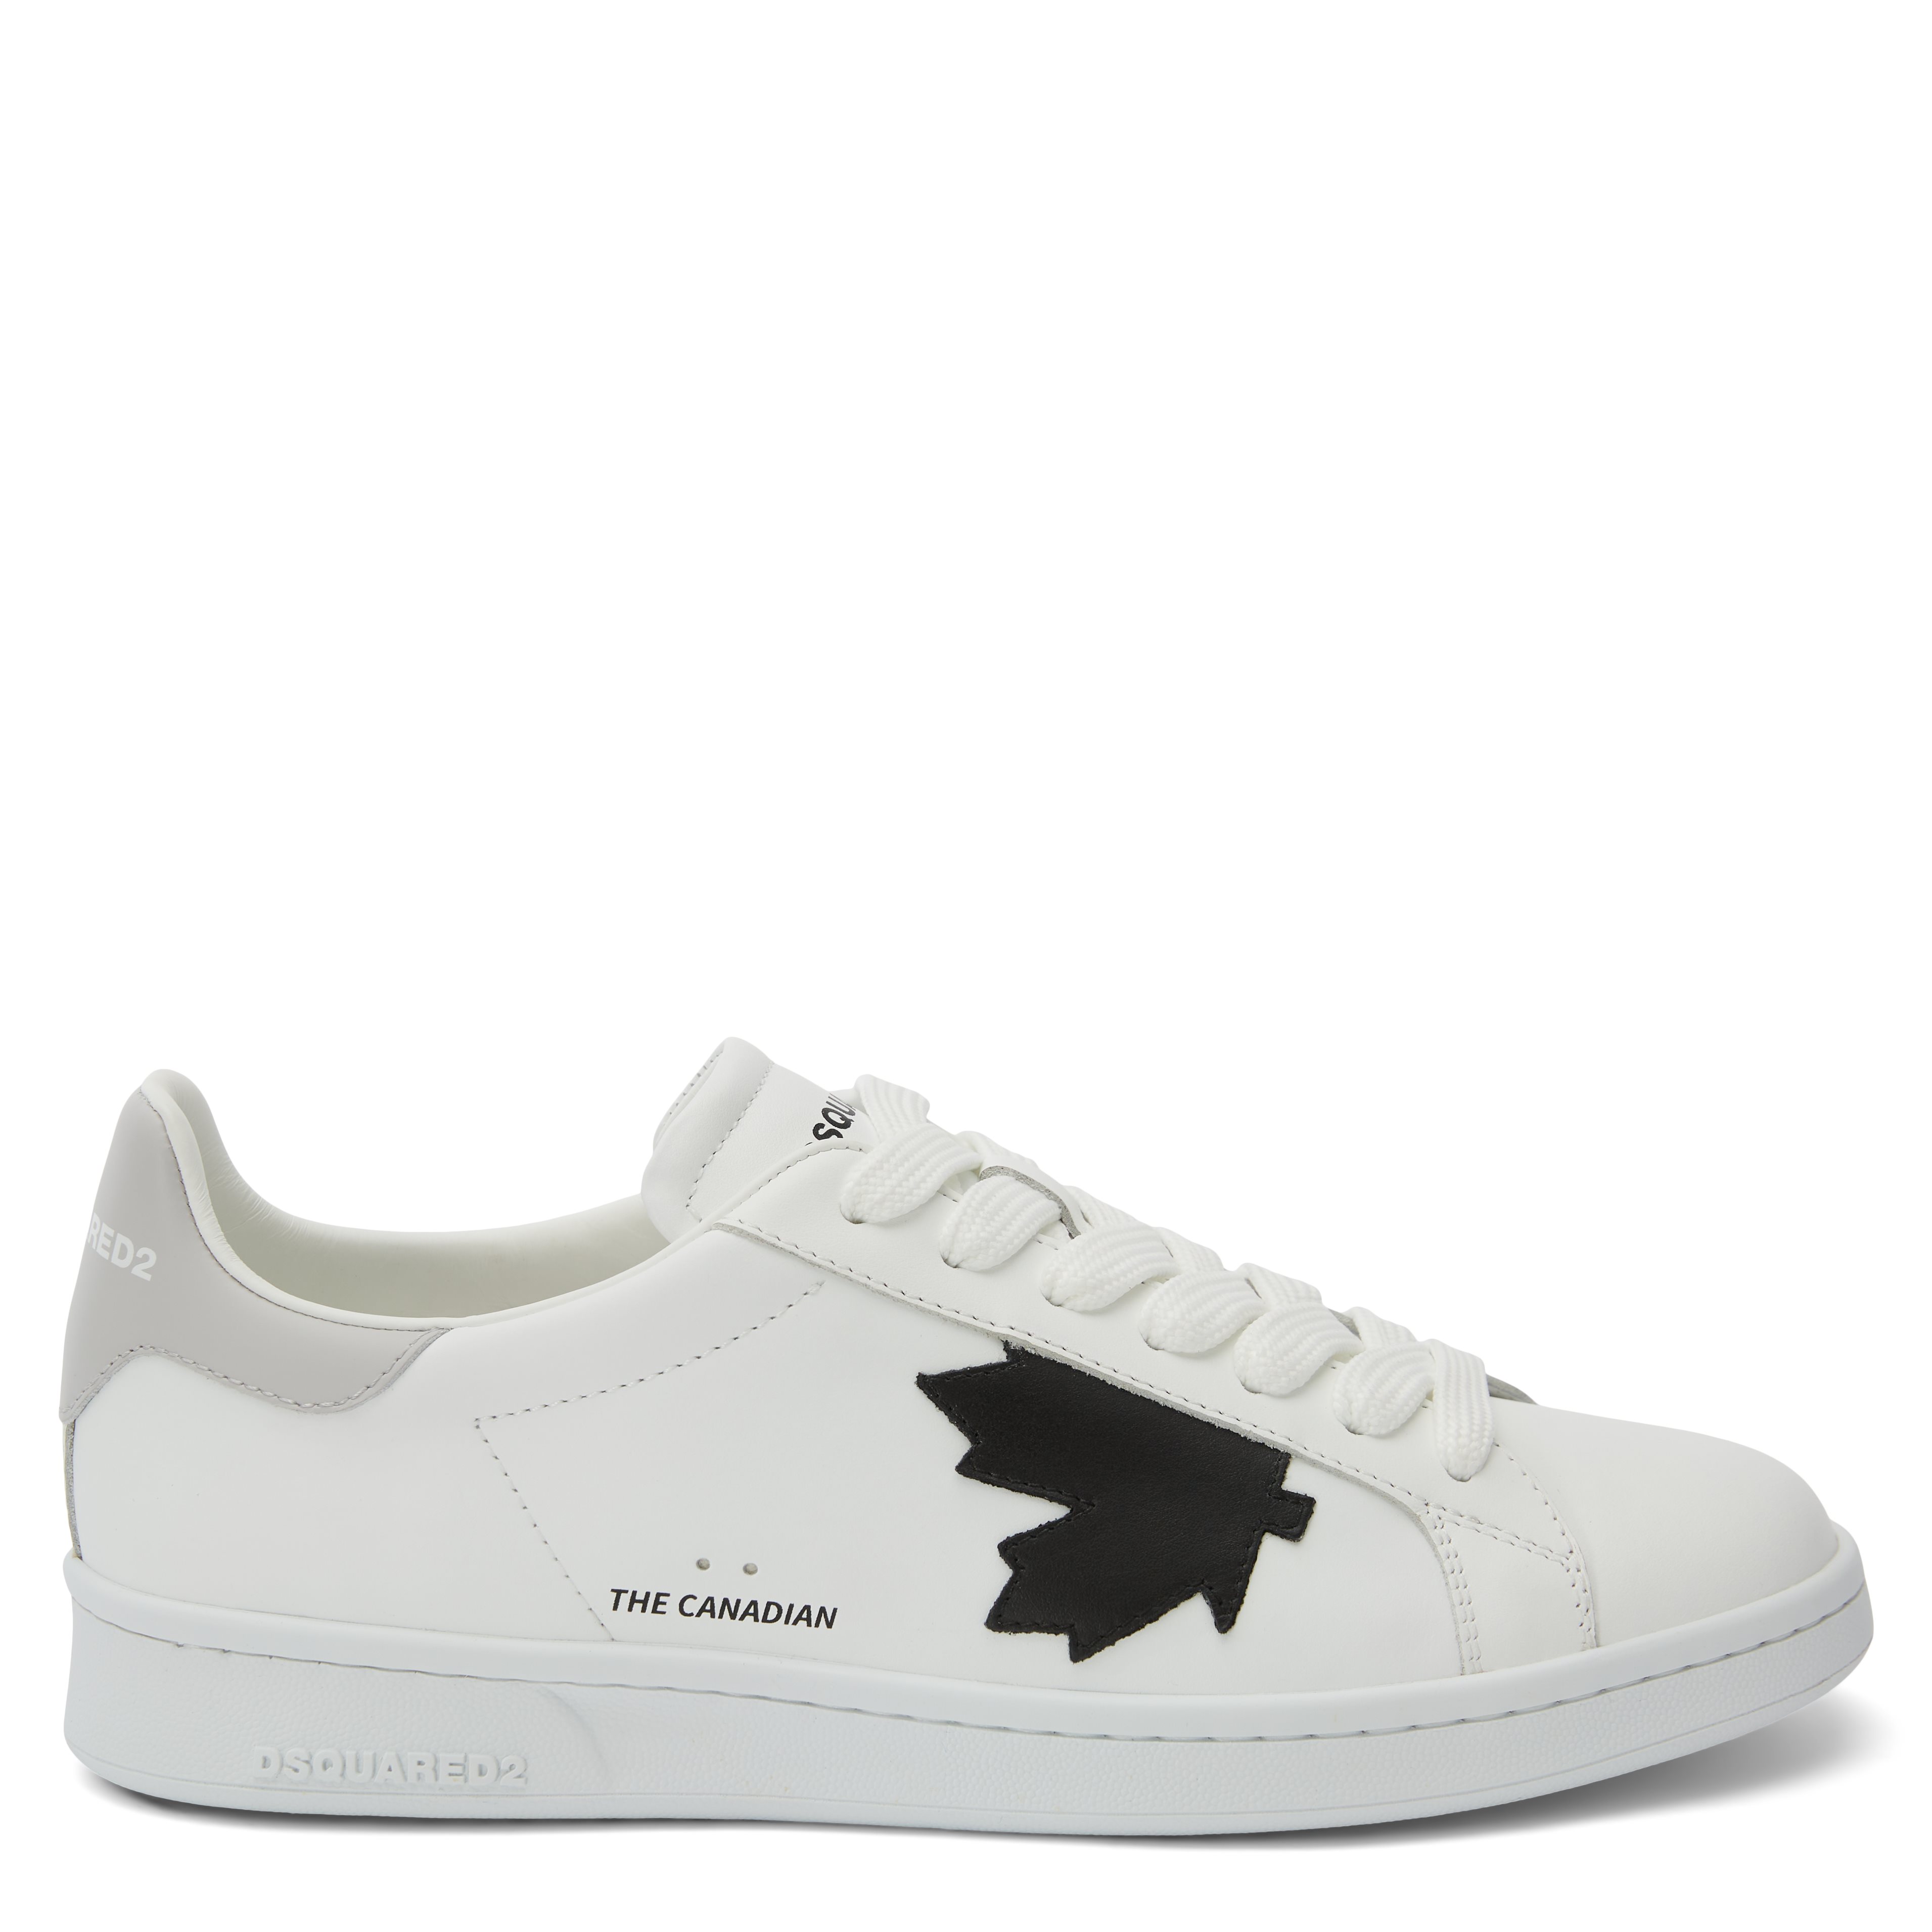 Dsquared2 Shoes SNM0174 01500443 White